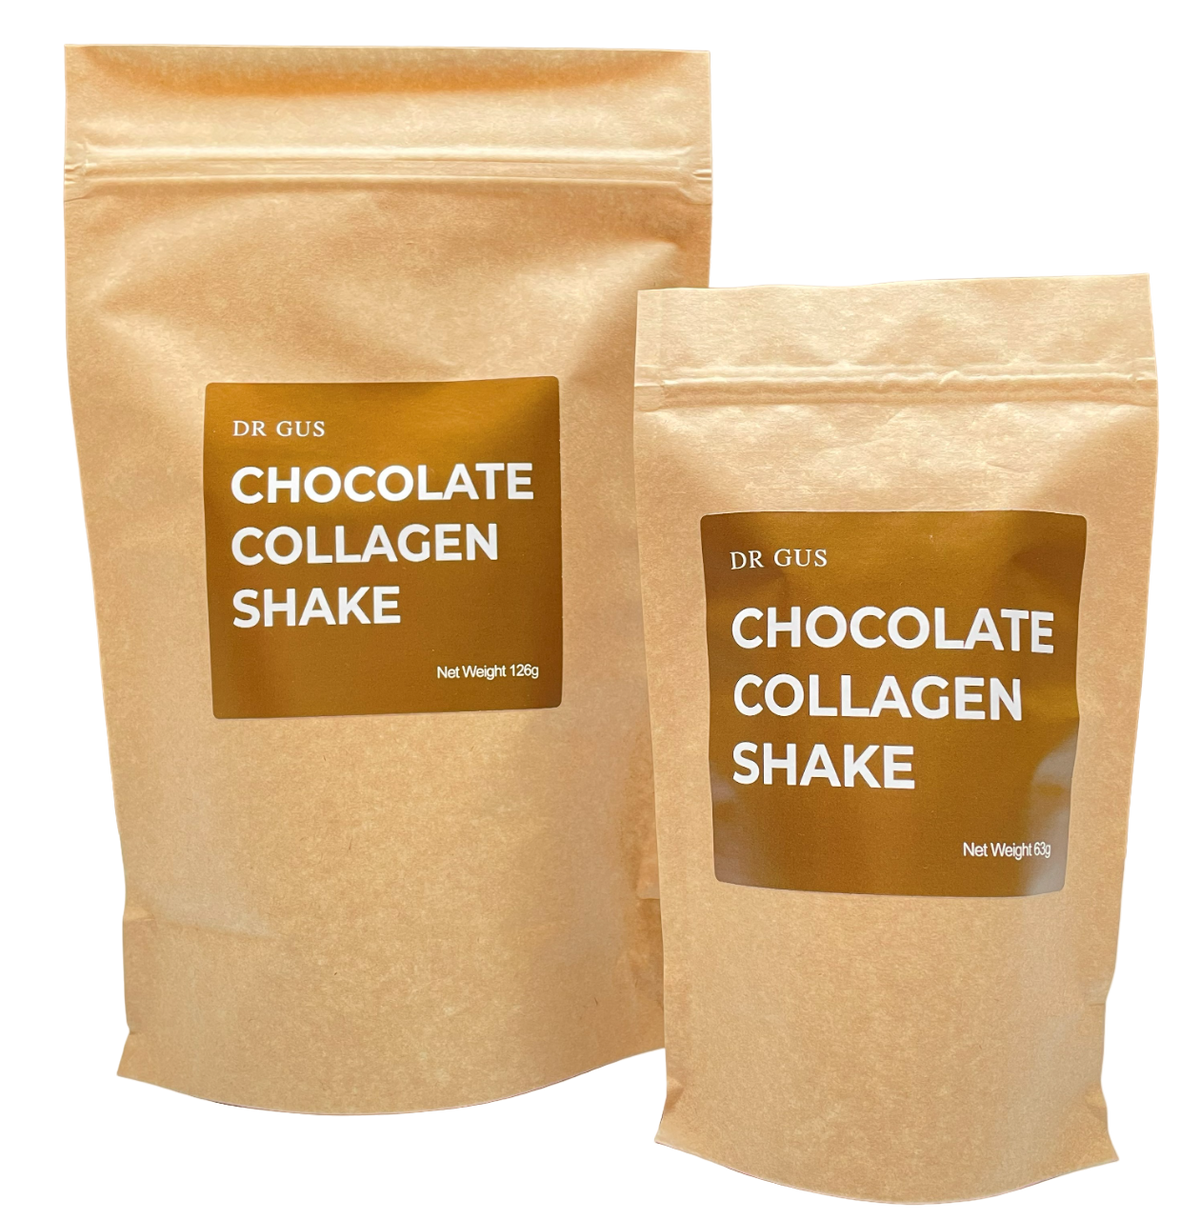 dr gus chocolate collagen shake both pouches